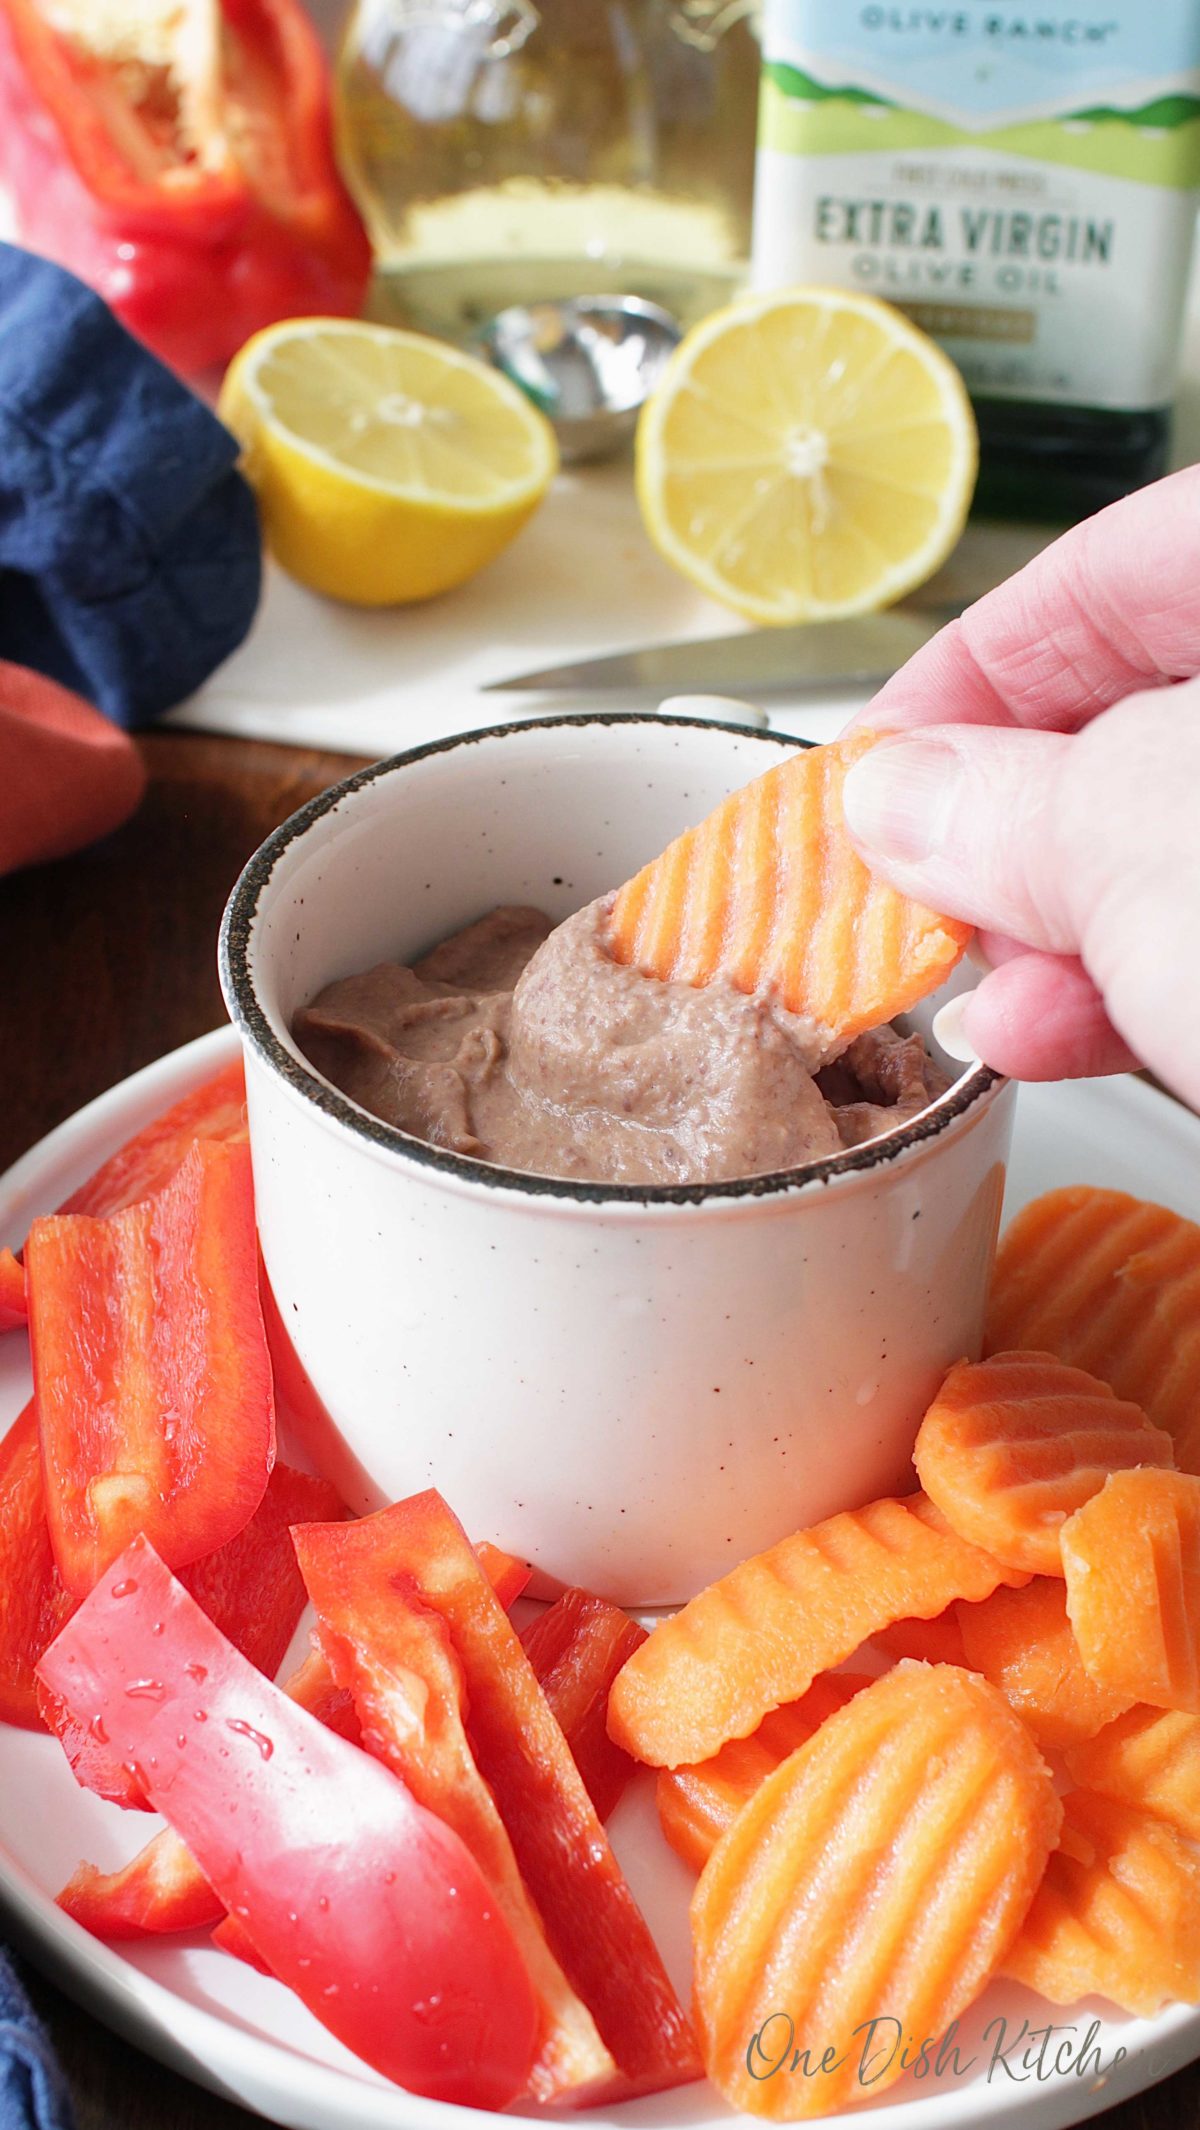 Carrot dipped in a small bowl of black bean hummus plated with sliced carrots and red peppers